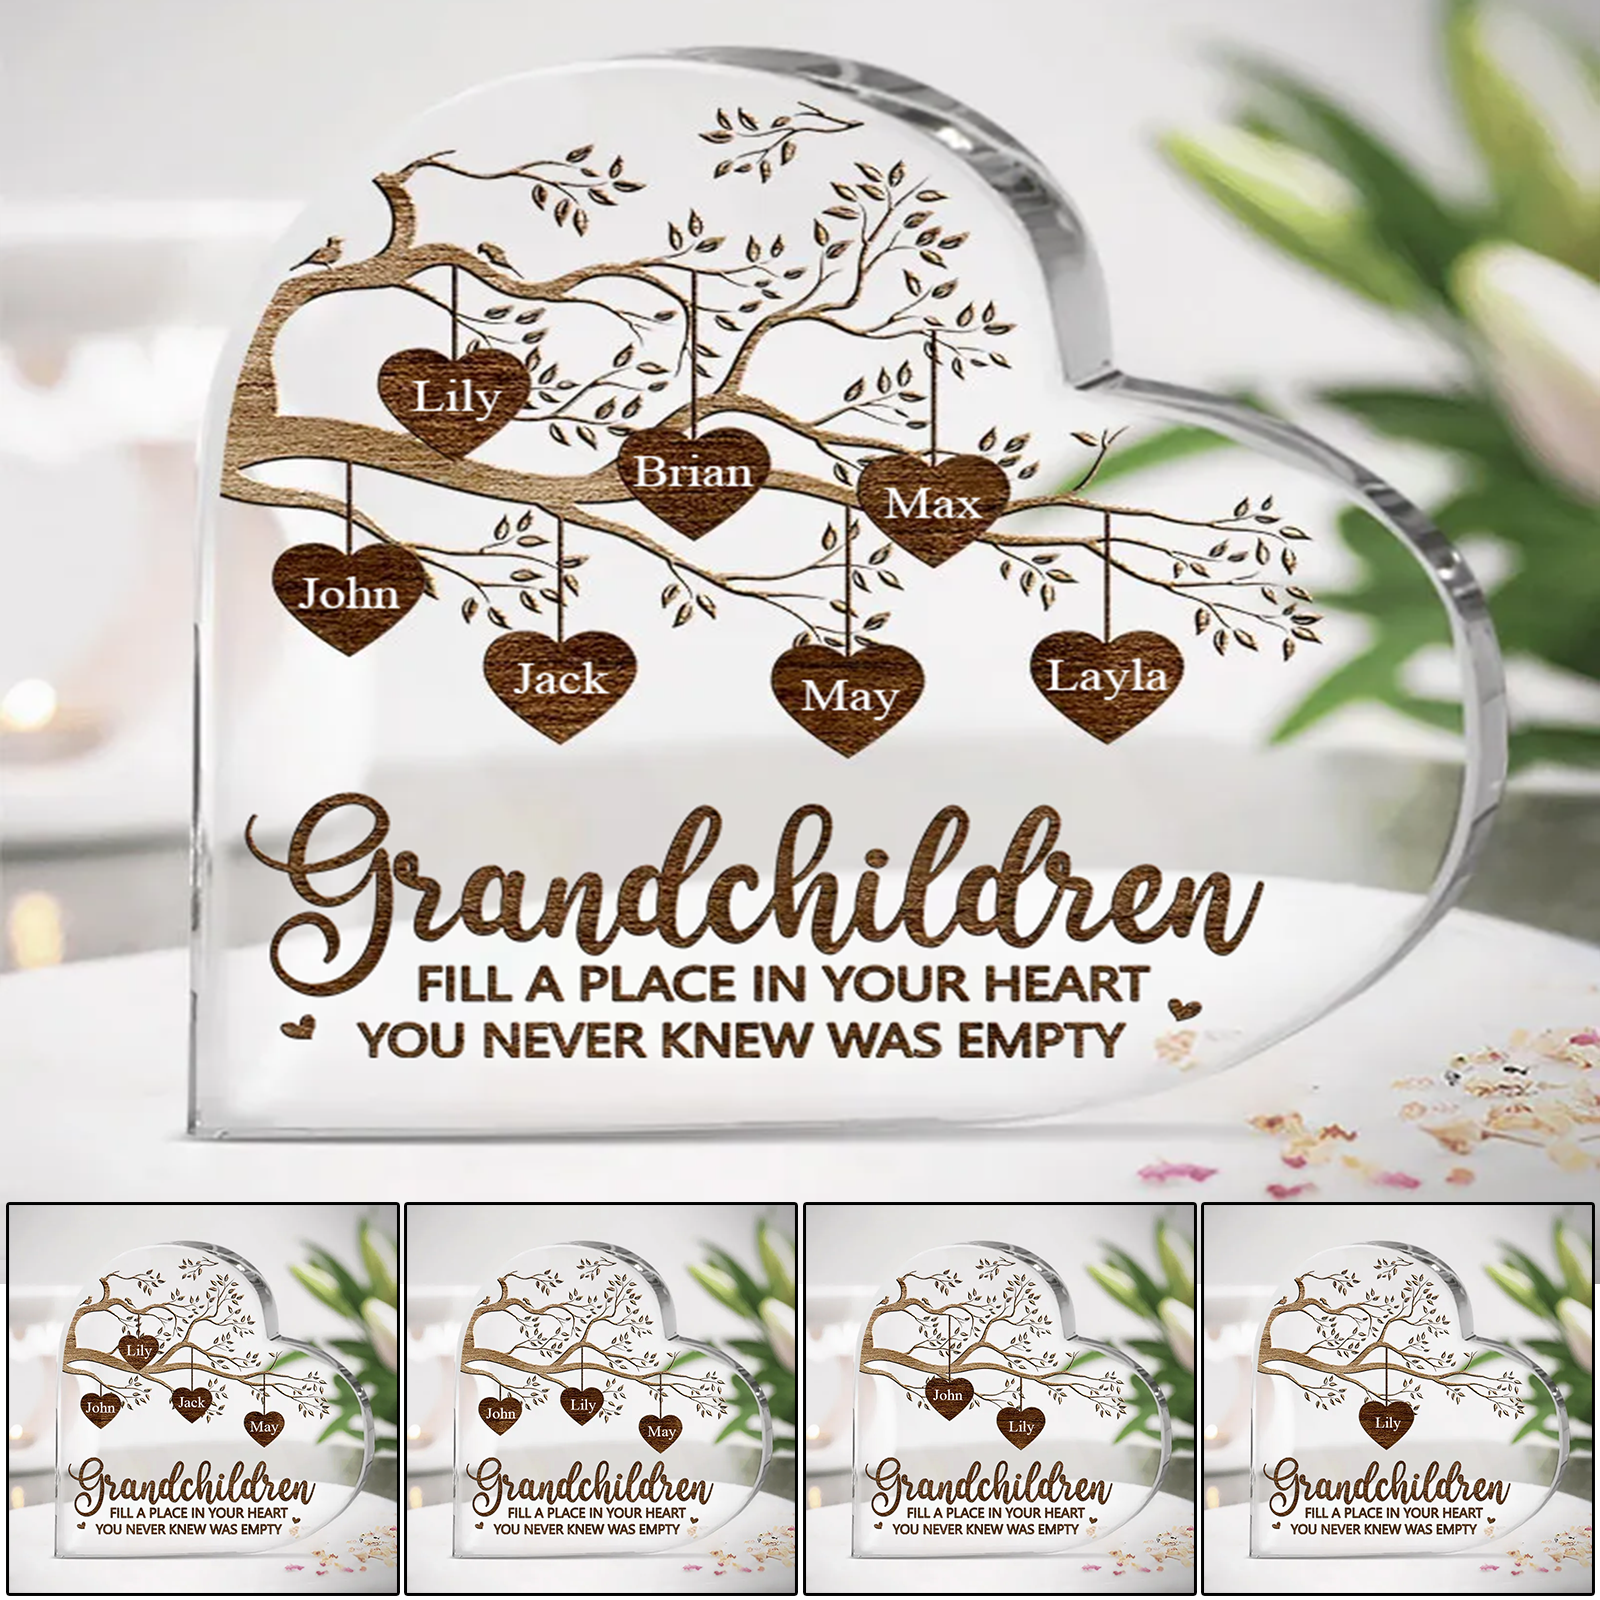 Grandchildren Custom Heart Shaped Acrylic Plaque, Mother's Day, Fill A Place In Your Heart You Never Knew Was Empty Personalized Custom Heart Shaped Acrylic Plaque